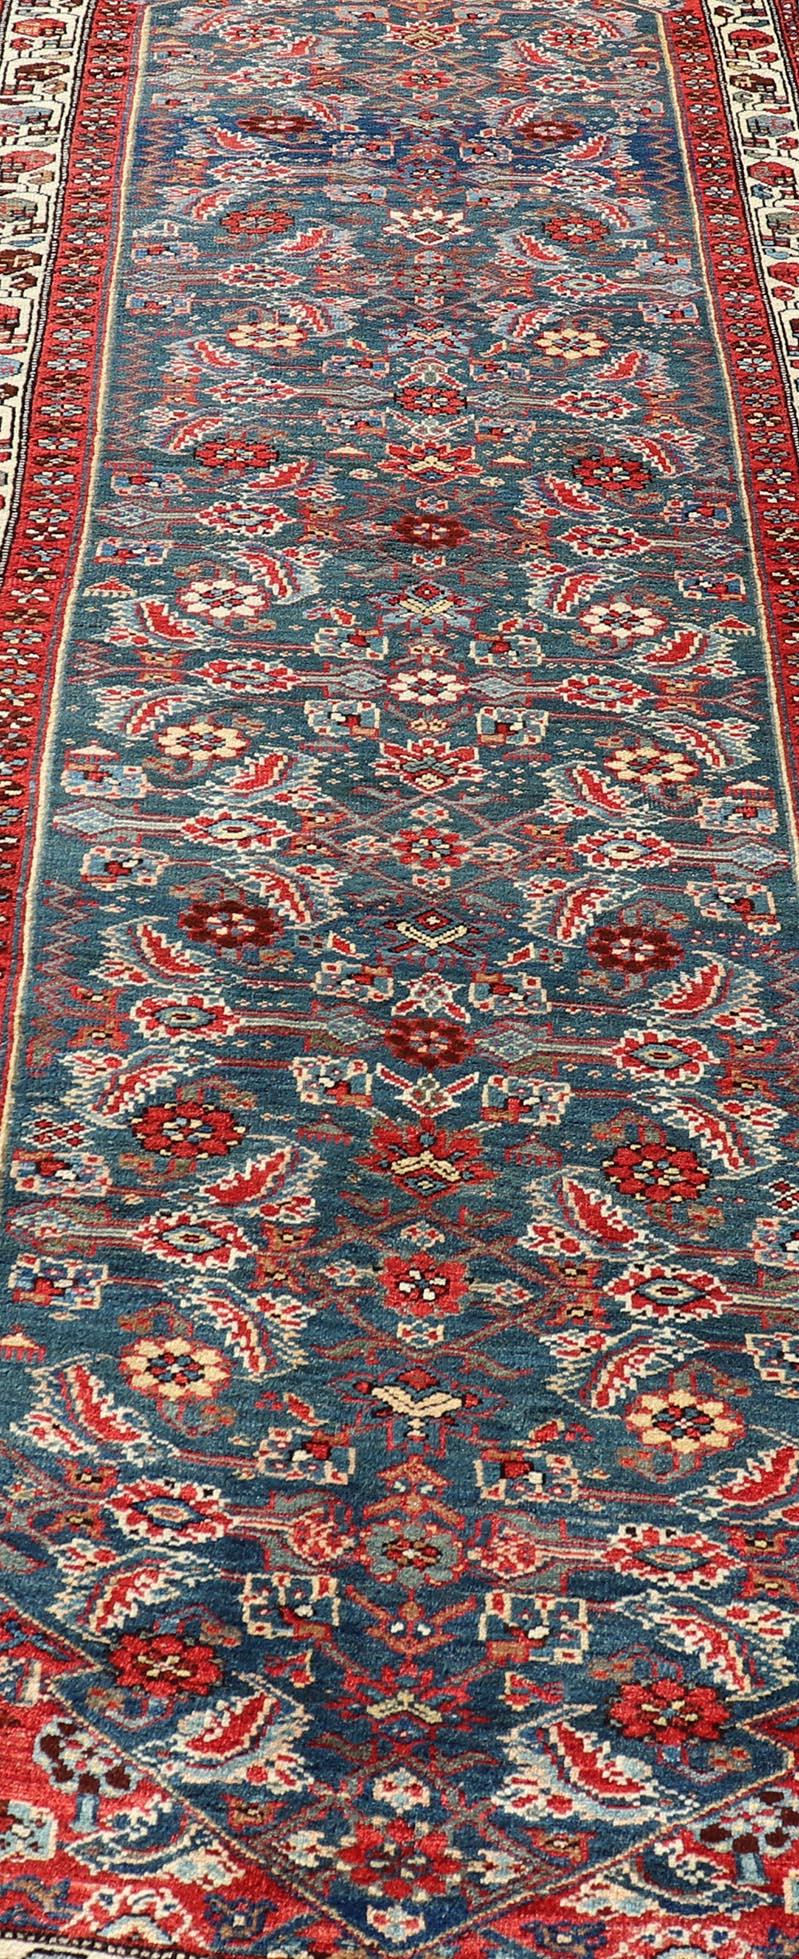 Late 19th Century Antique Persian Bidjar Rug with Large Floral Motifs in Blue, Red, and Ivory For Sale